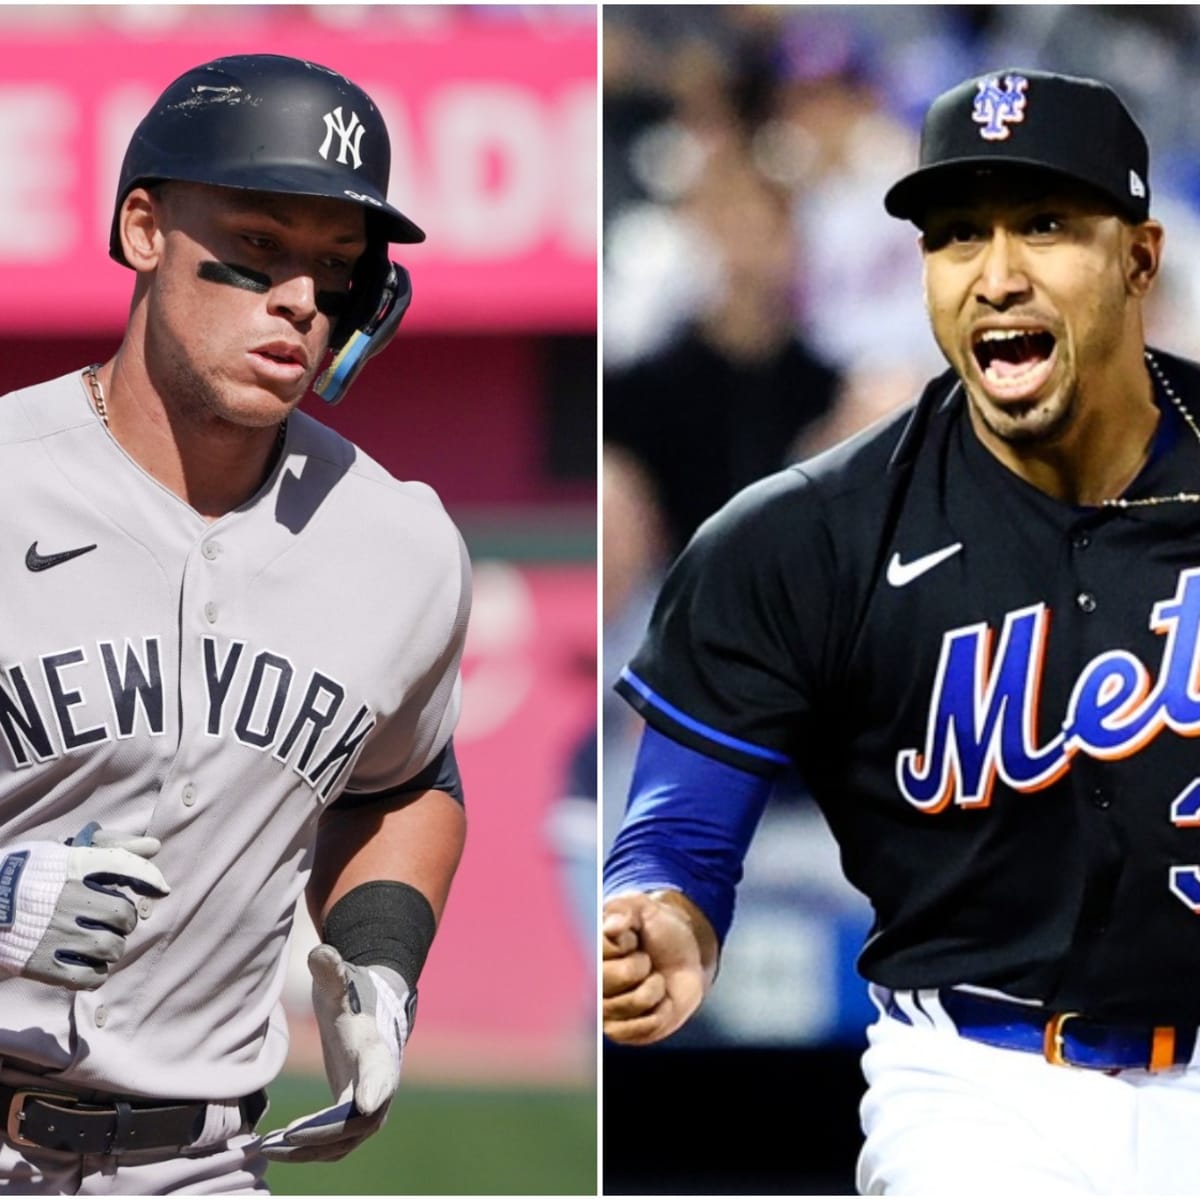 Yankees, Mets combine for 5 of MLB's 20 best-selling jerseys